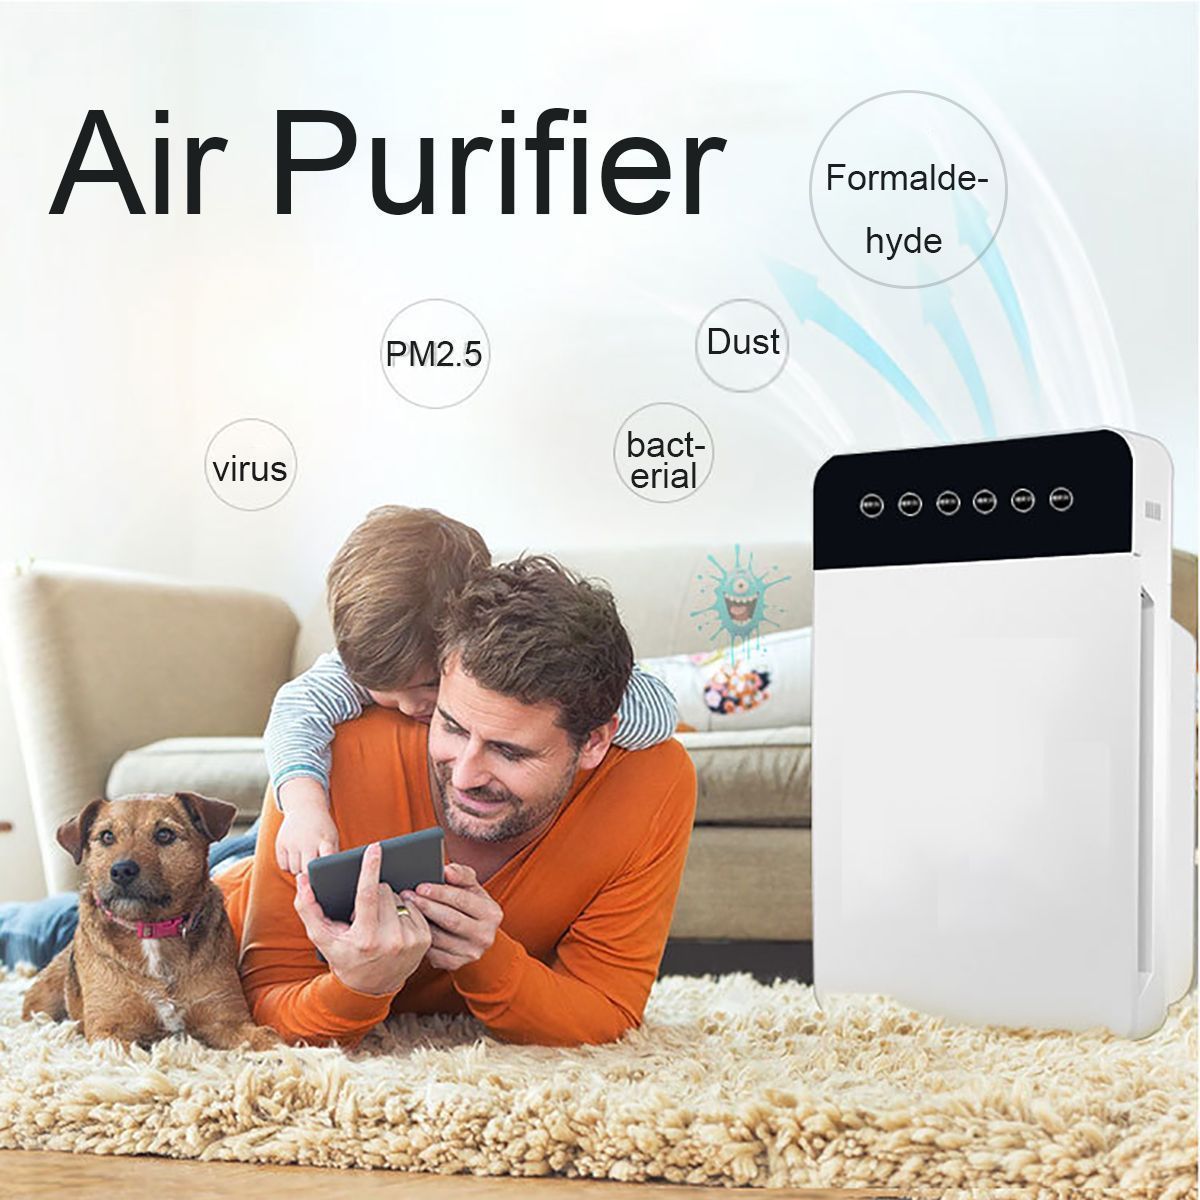 Air-Purifier-Negative-Ions-Air-Cleaner-Remove-Formaldehyde-PM25-W-HEPA-Filter-1628421